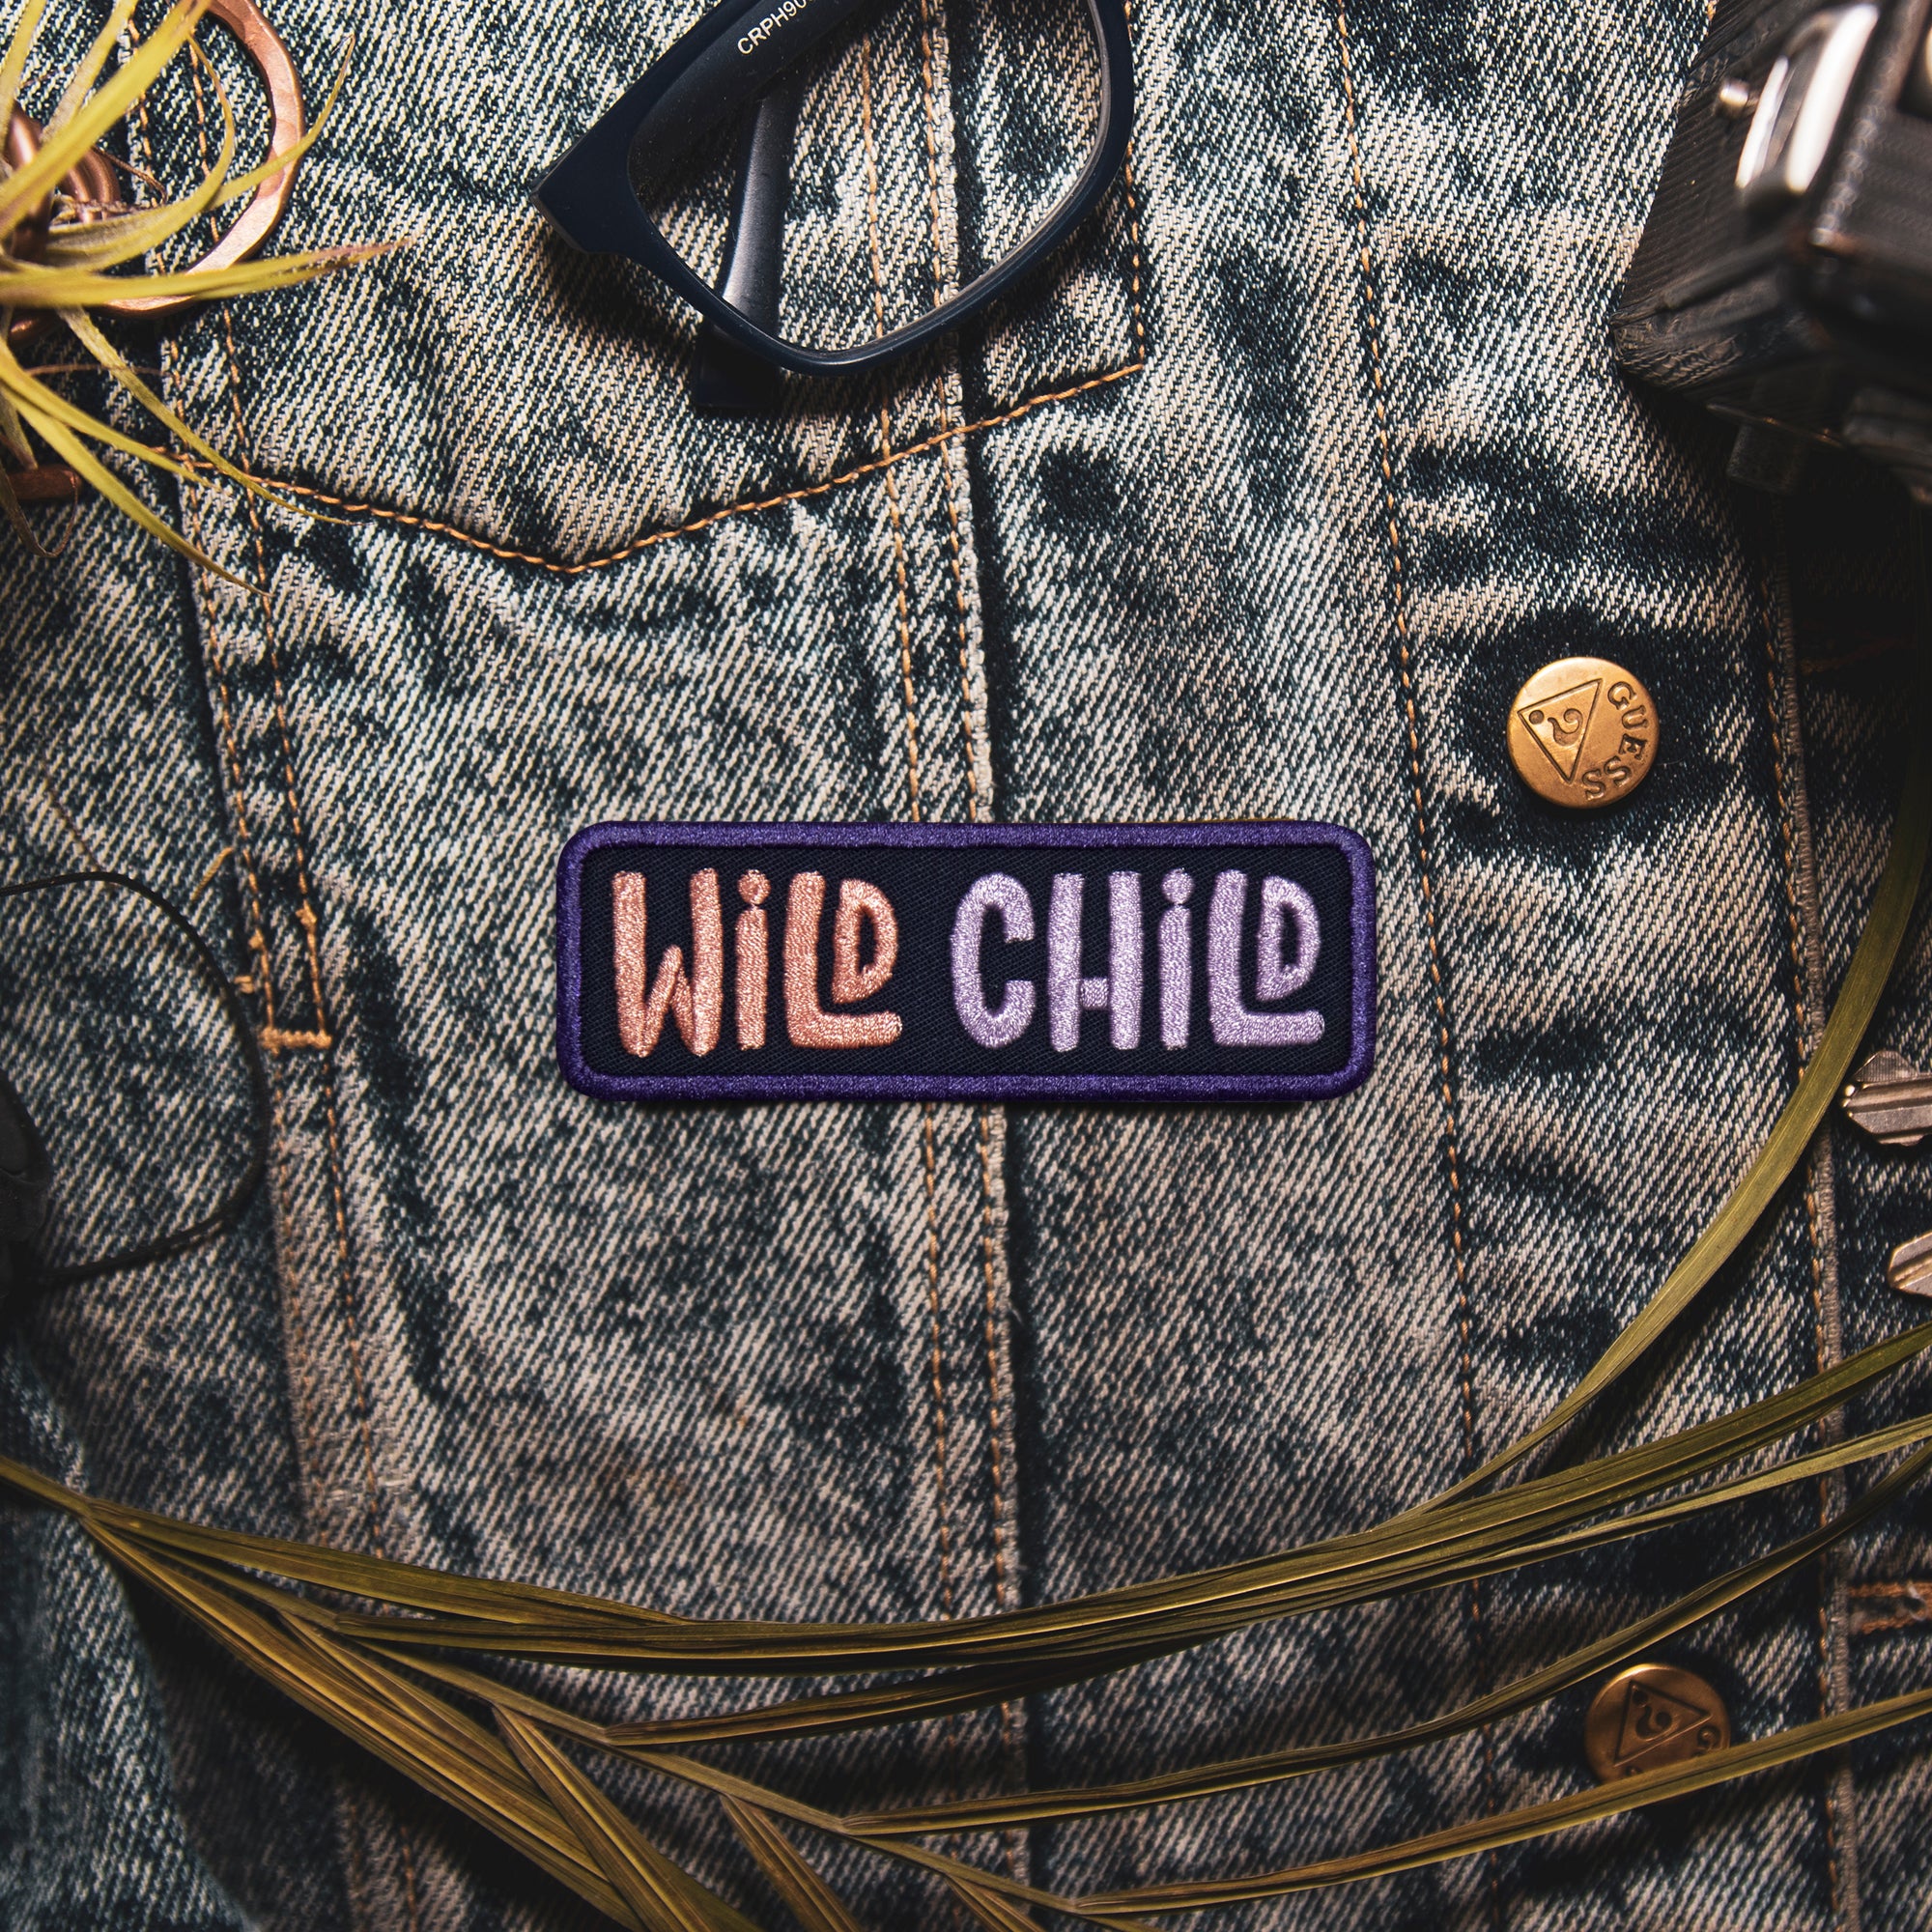 Wild Child Patches Sew on Patches for Jackets Hats and Bags 